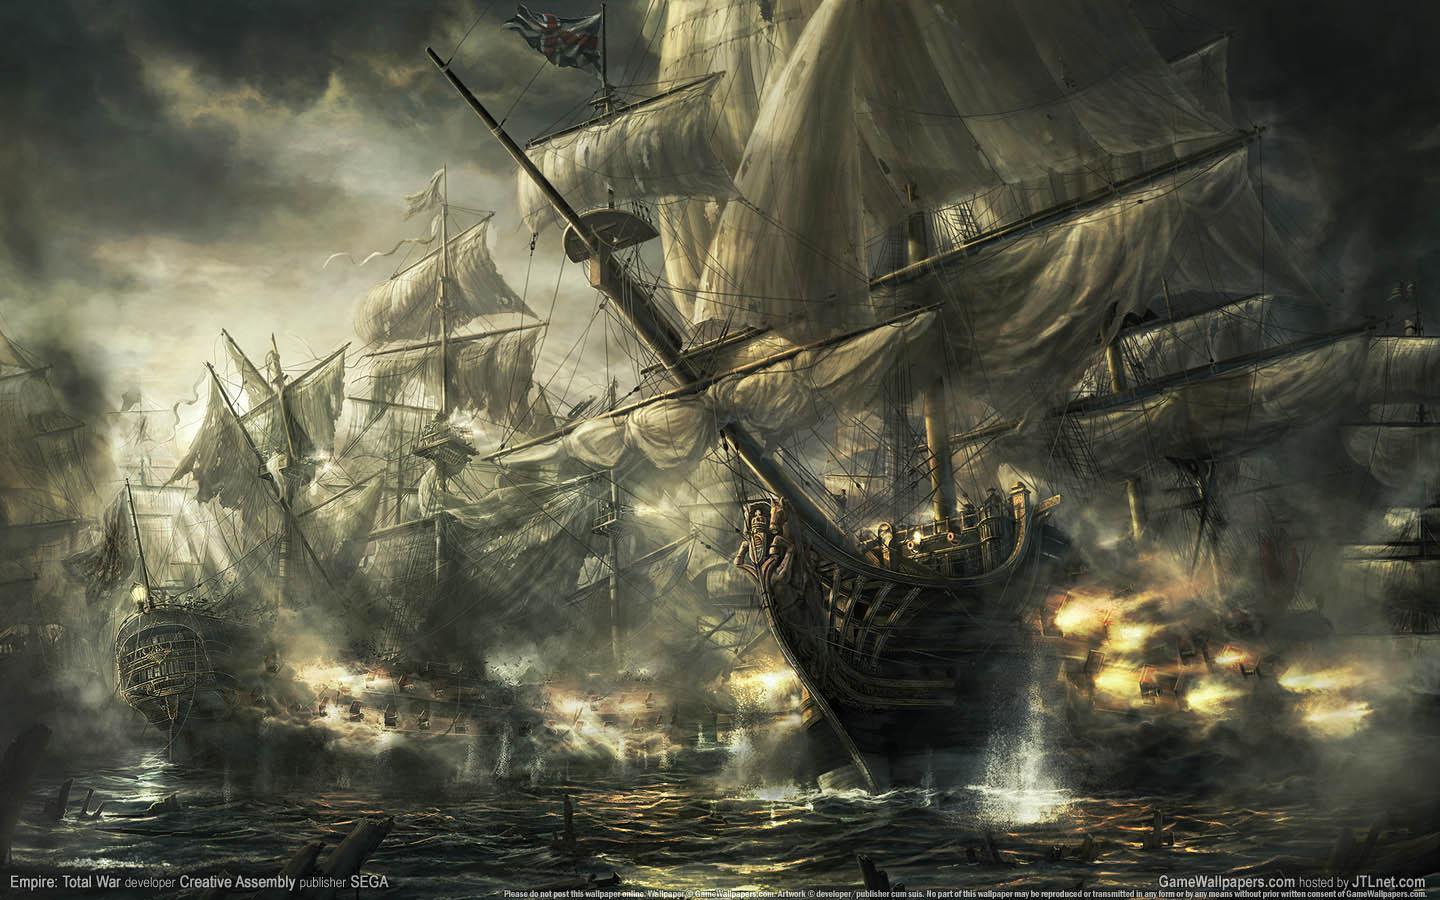 Pirate ship wallpapers